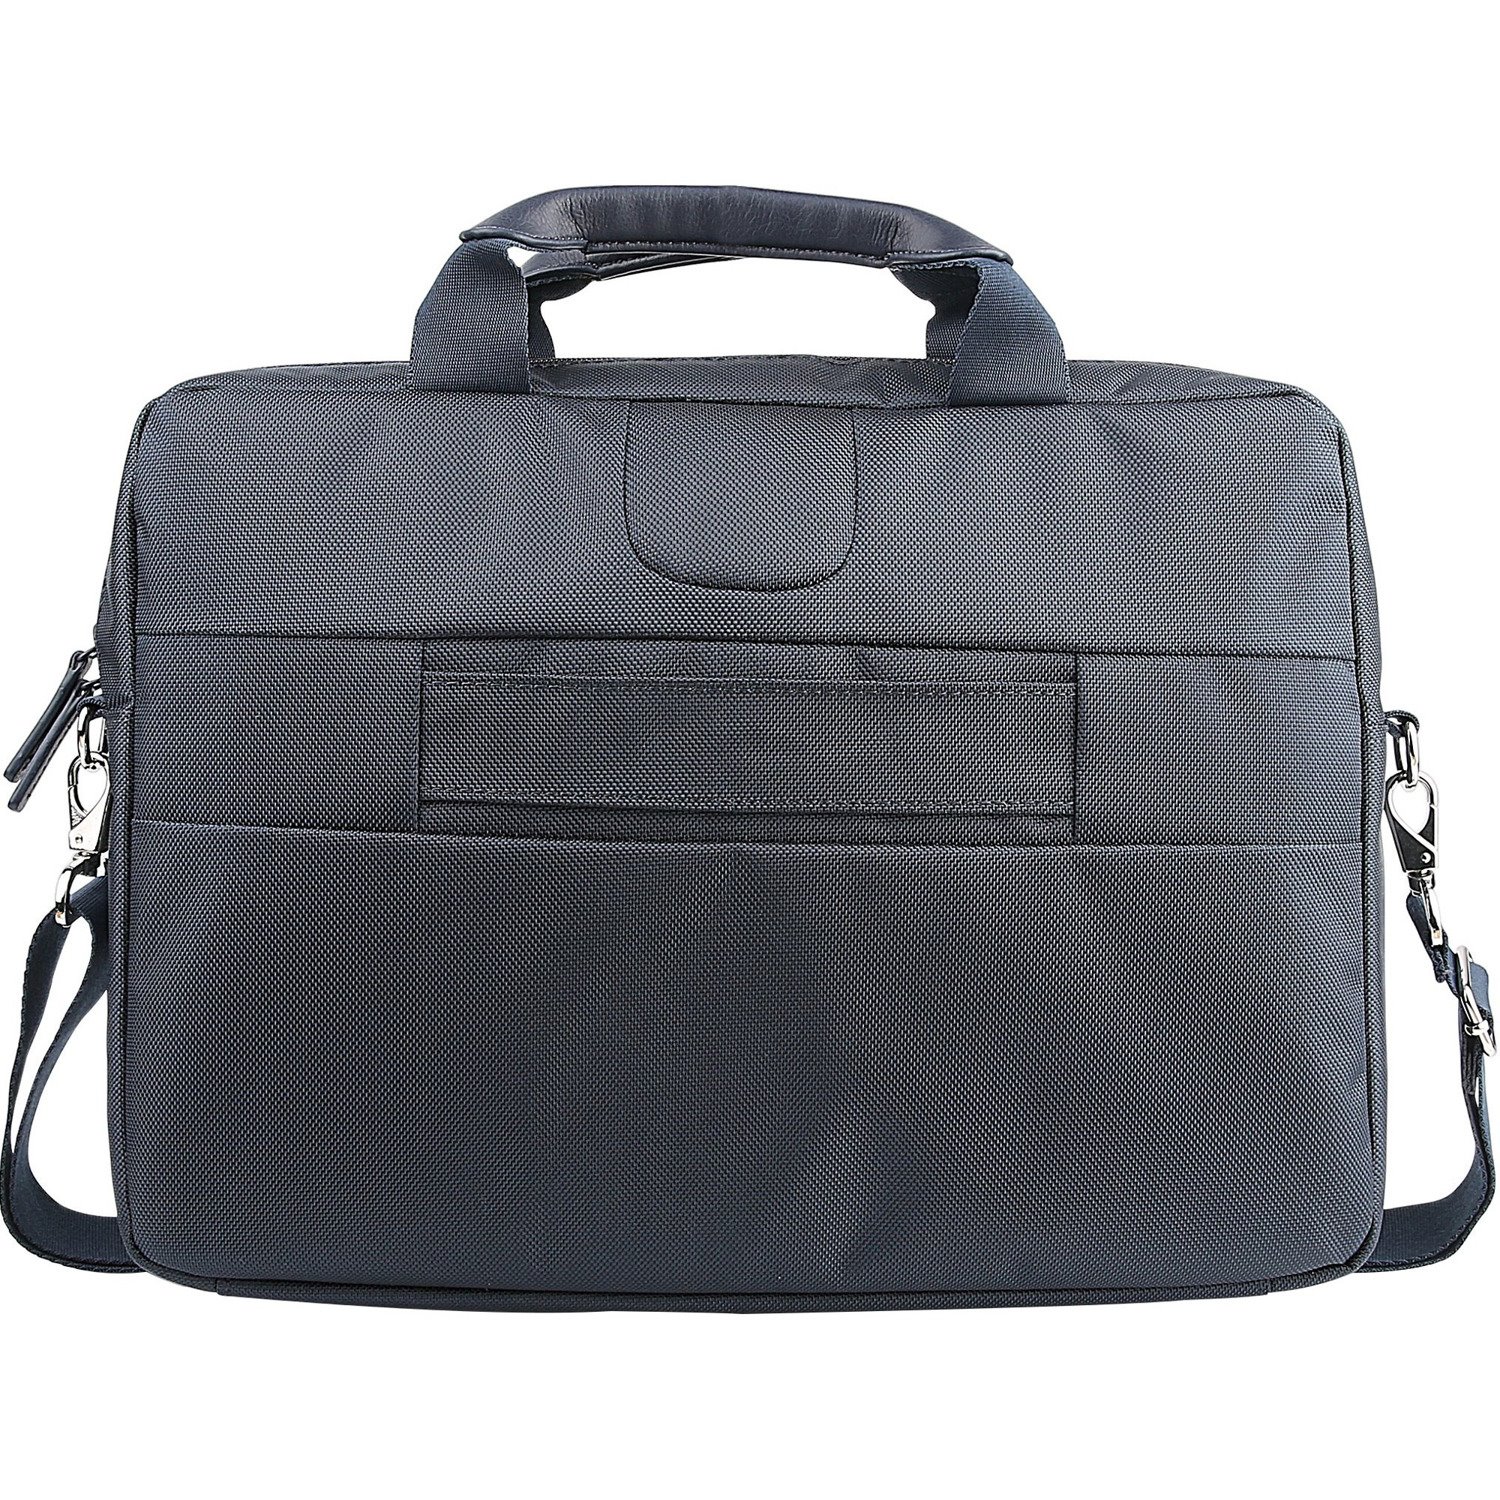 Lenovo Carrying Case for 15.6" Notebook - Blue